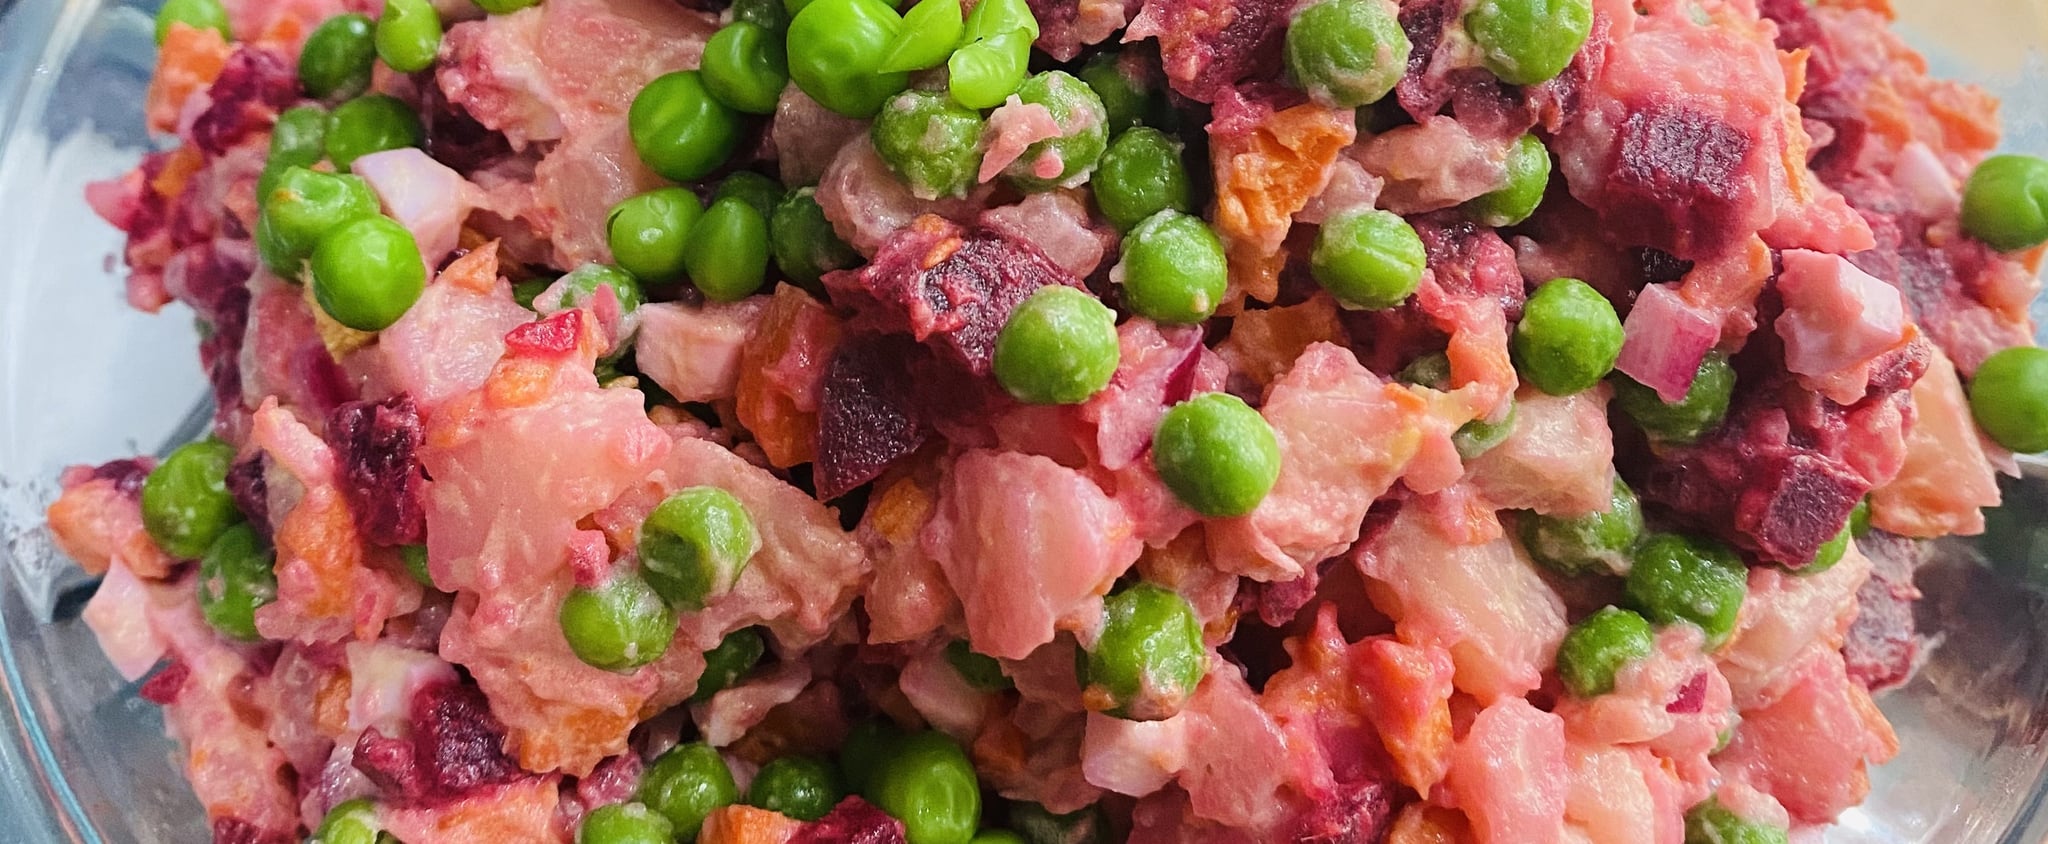 Delightful Pink Potato Salad: A Beloved Classic in the Dominican